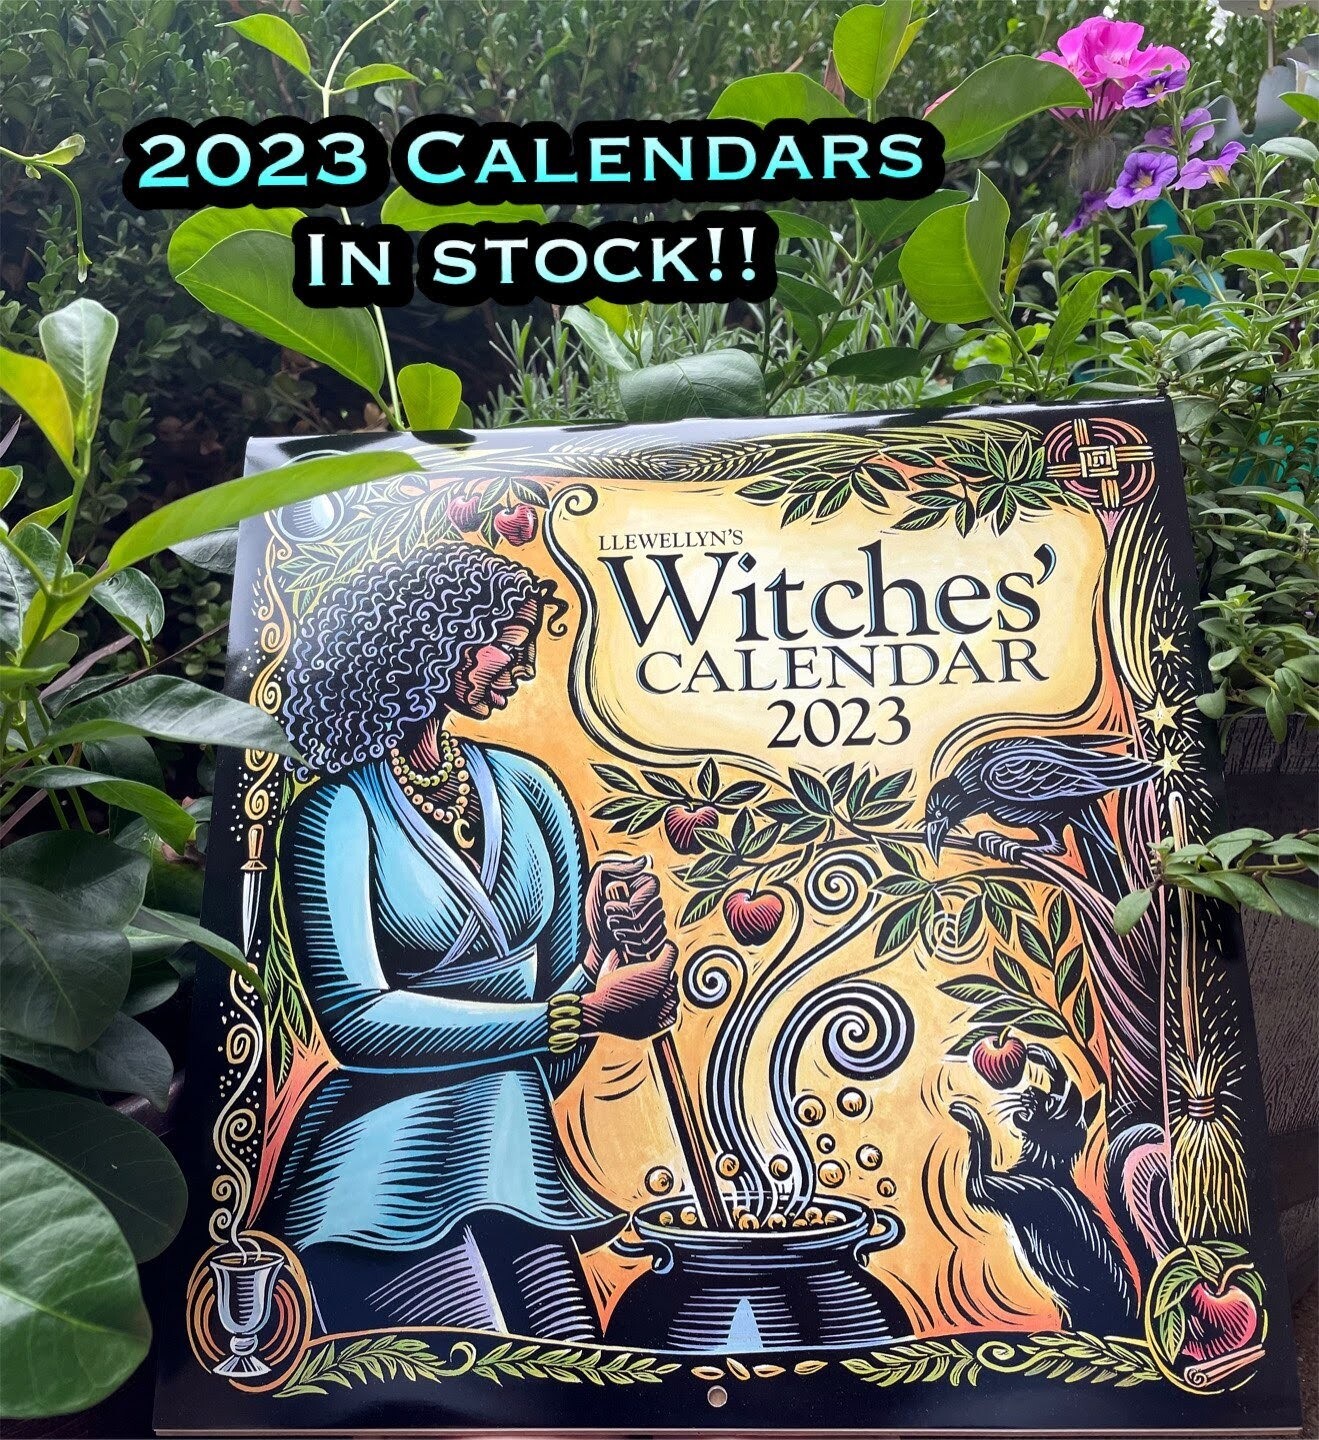 2023 WITCHES' CALENDAR